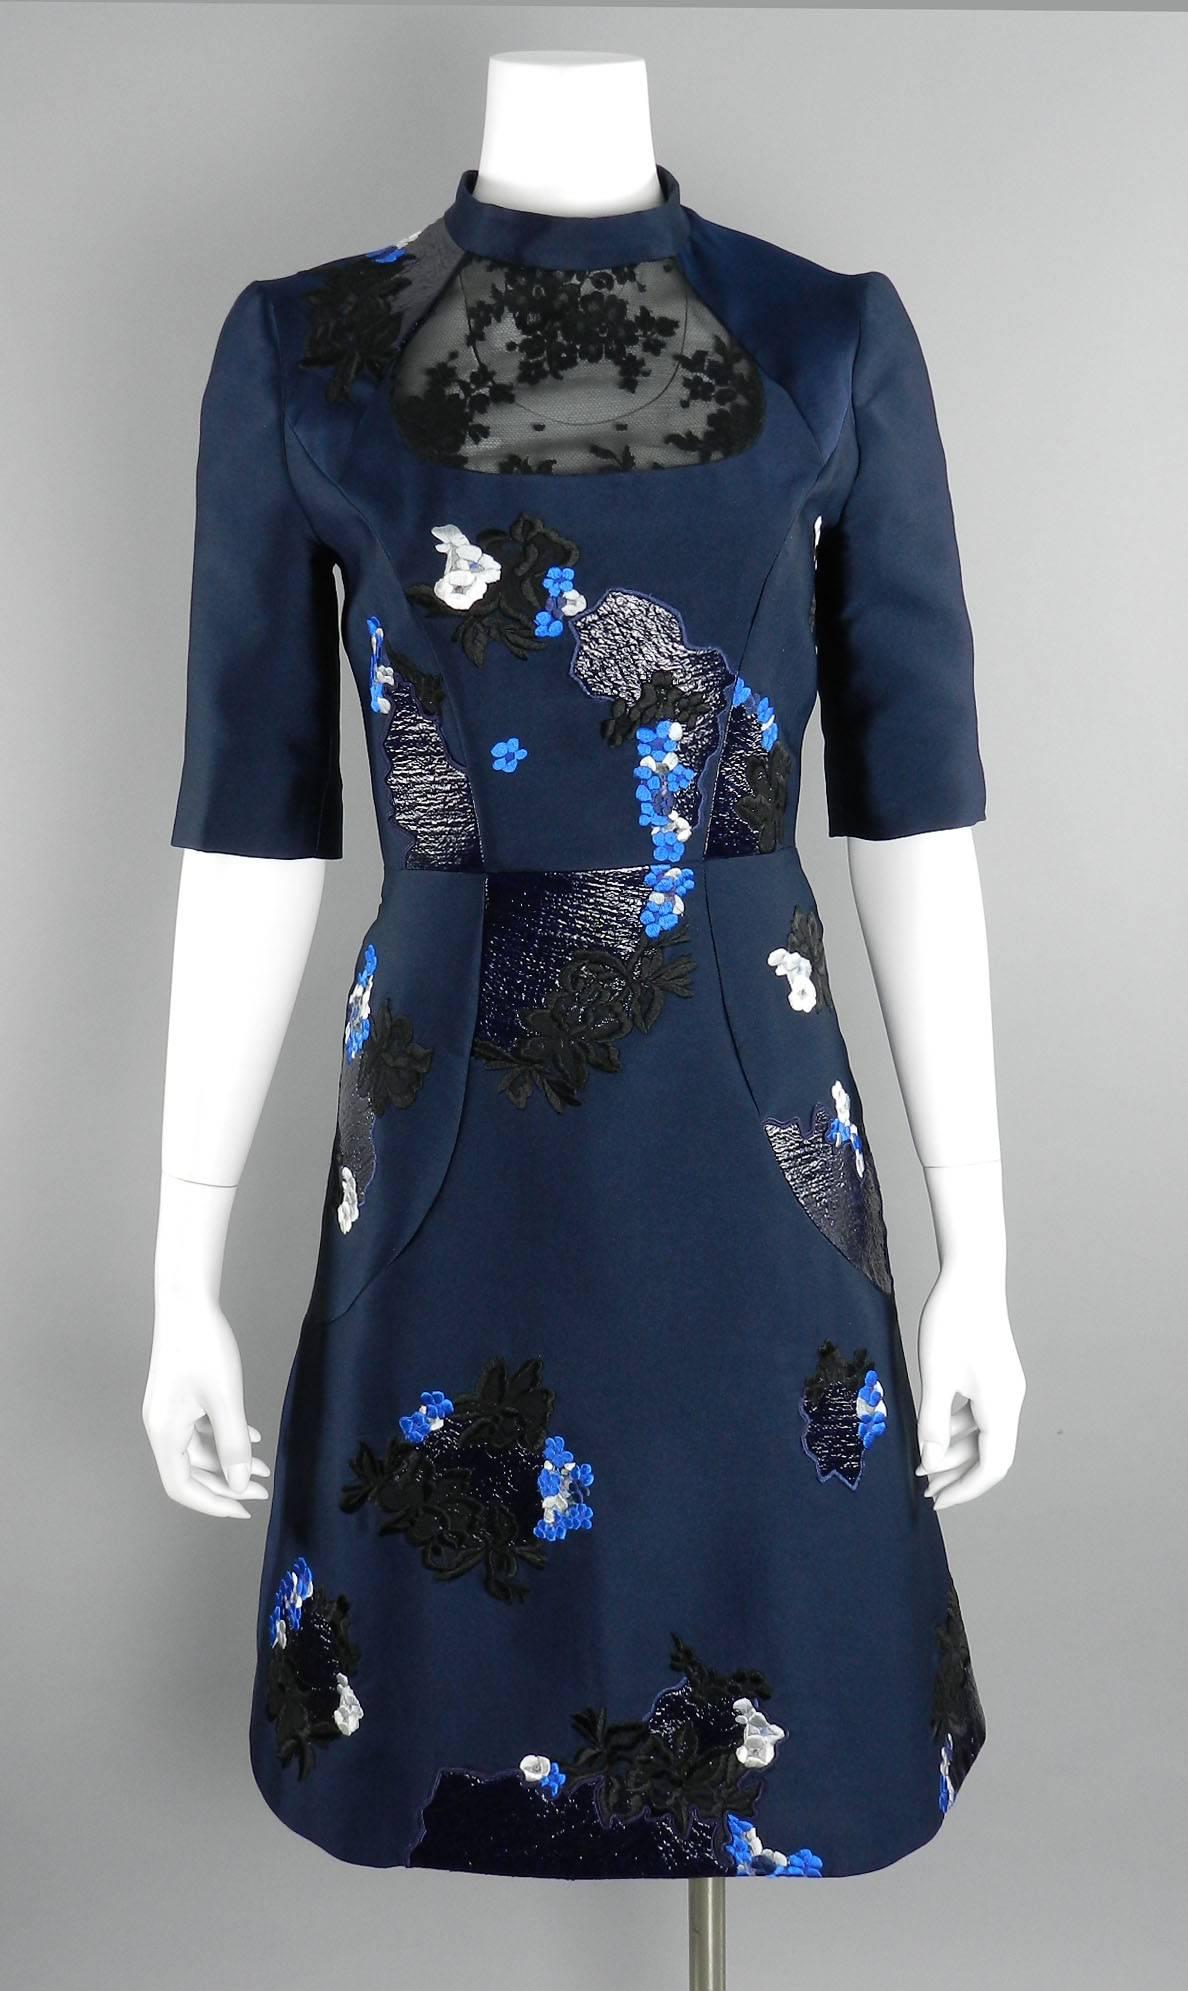 Erdem fall 2012 Runway Navy Lace Embroidered Dress 6